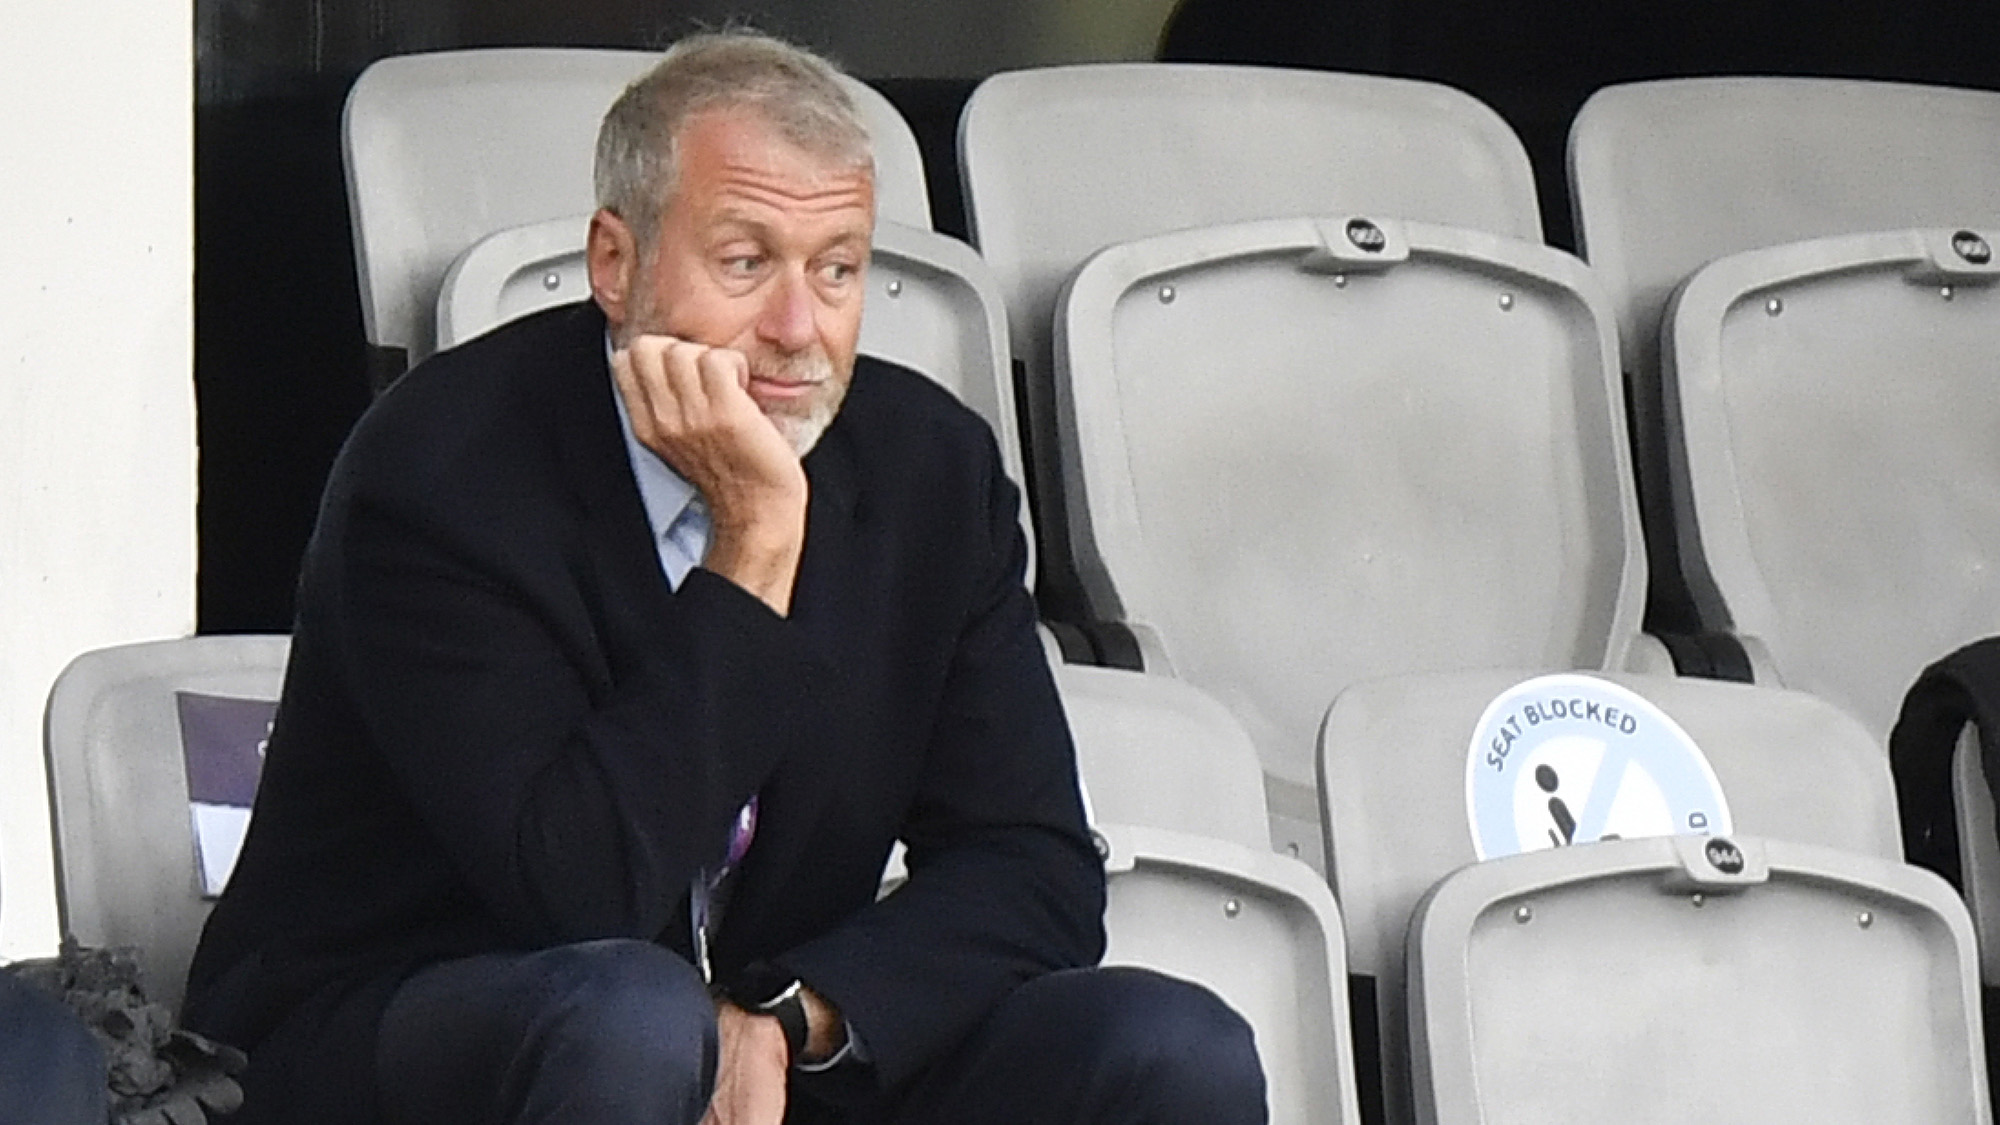  Russian billionaire Roman Abramovich attends the UEFA Women's Champions League final soccer match against FC Barcelona in Gothenburg, Sweden on May 16, 2021. 